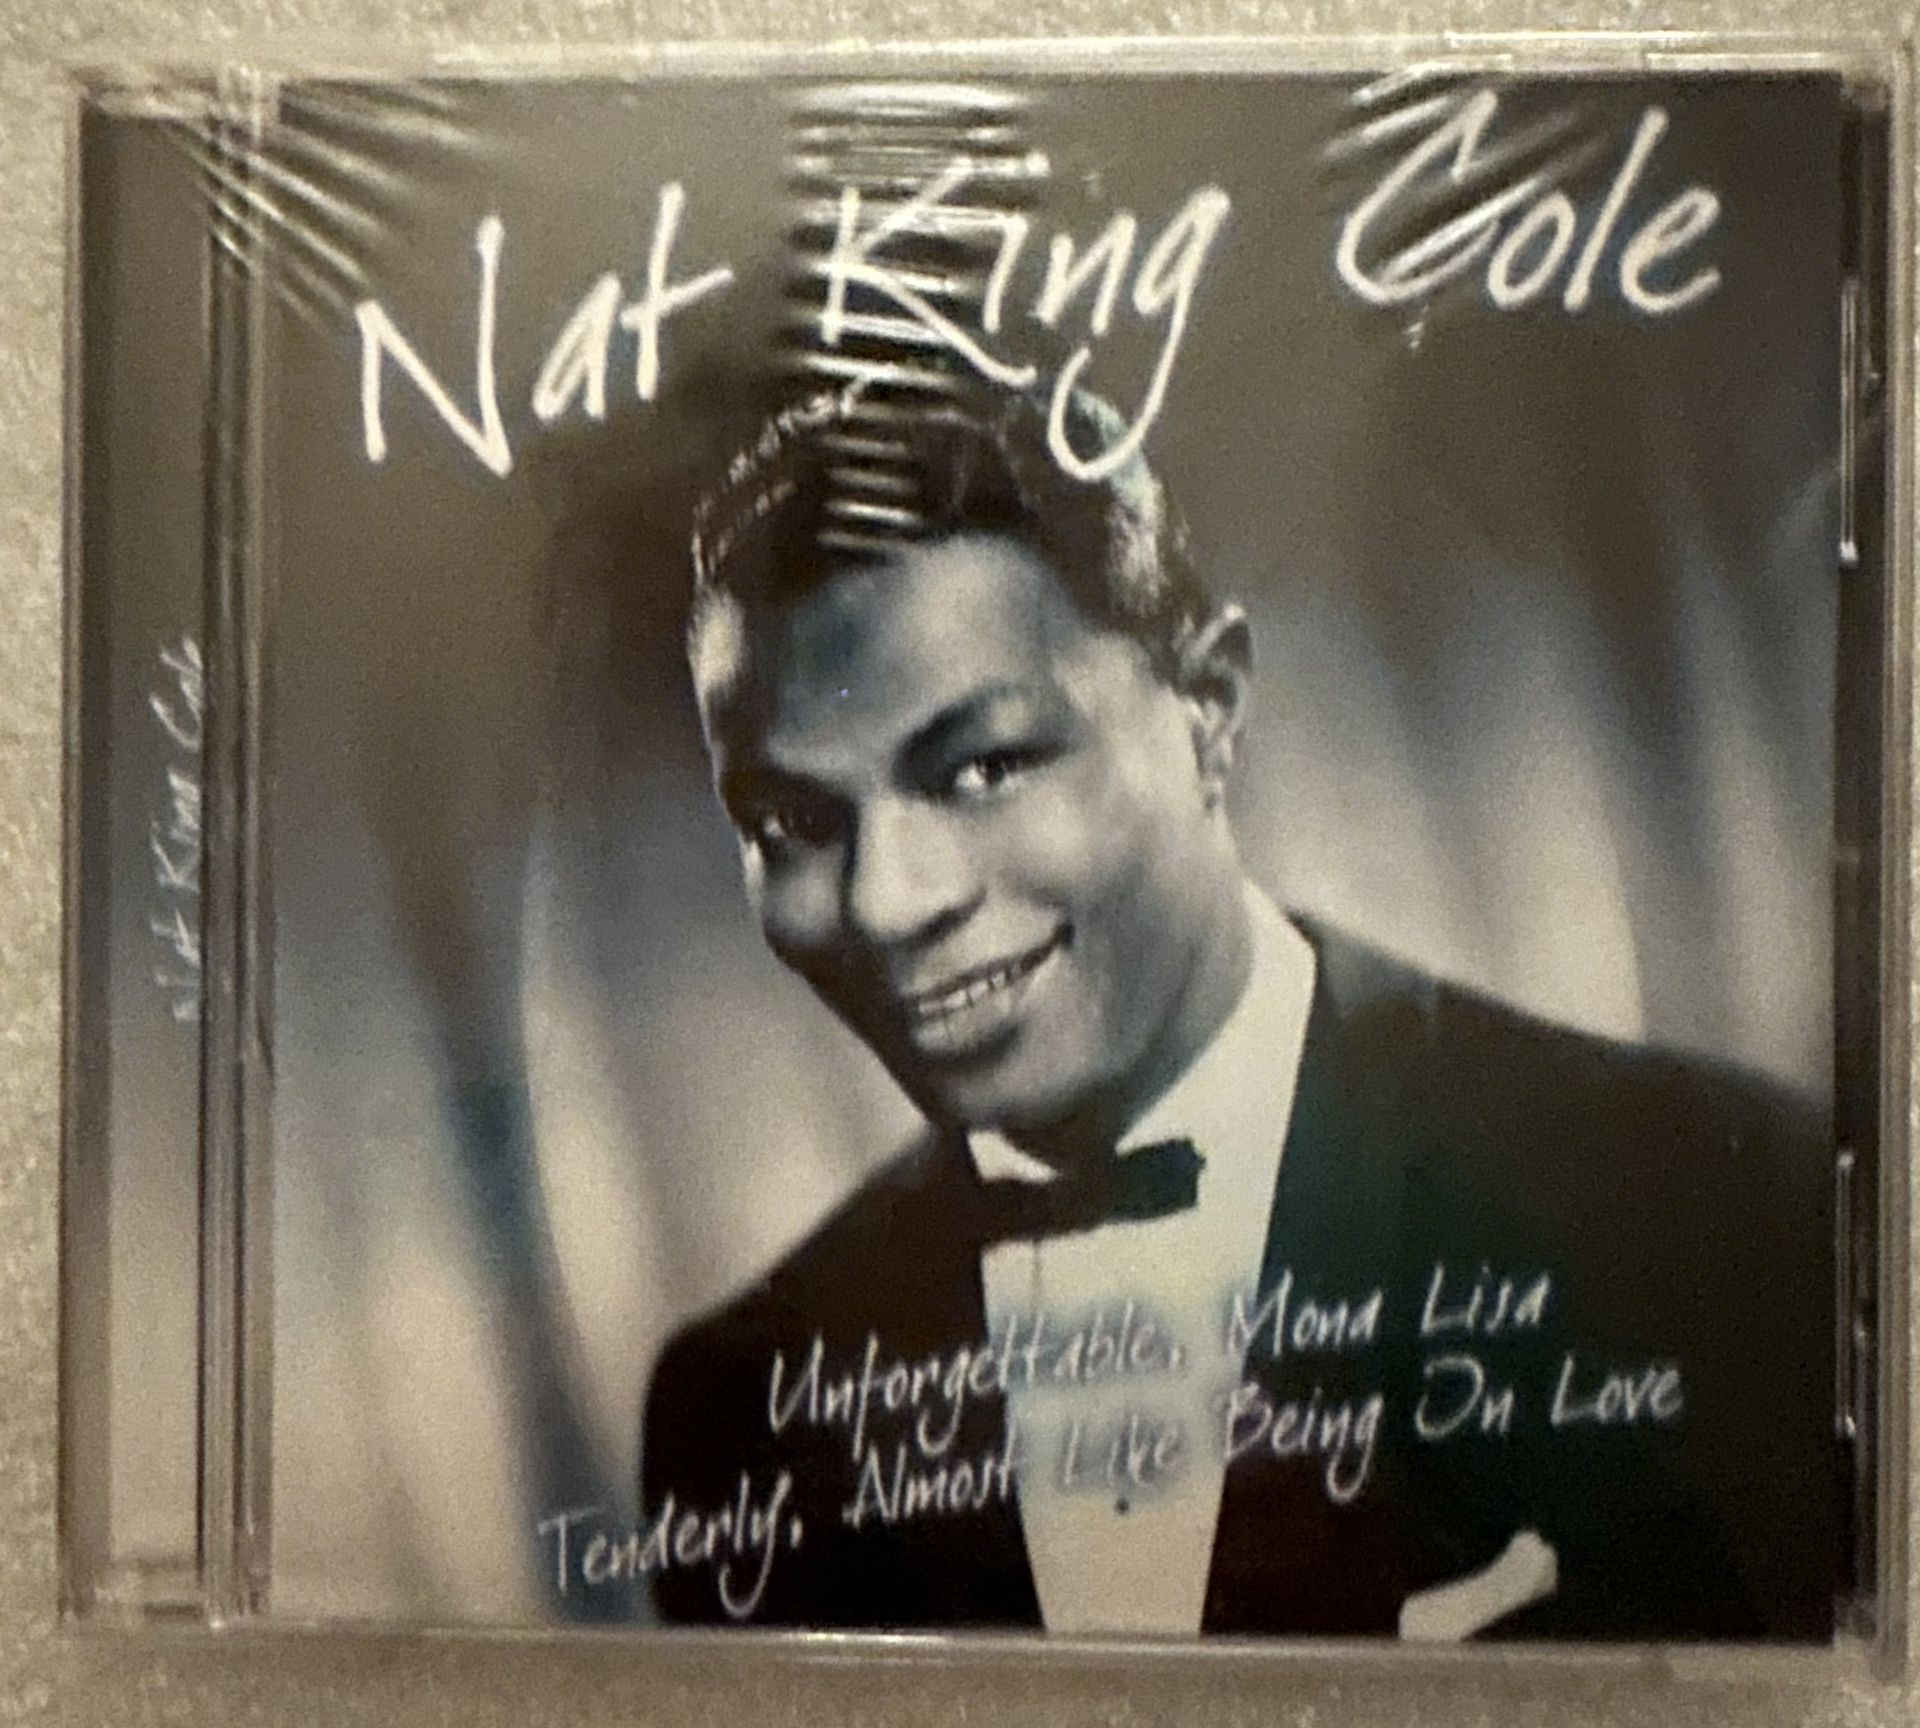 NEW Nat King Cole -  CD By Nat King Cole -Factory Sealed